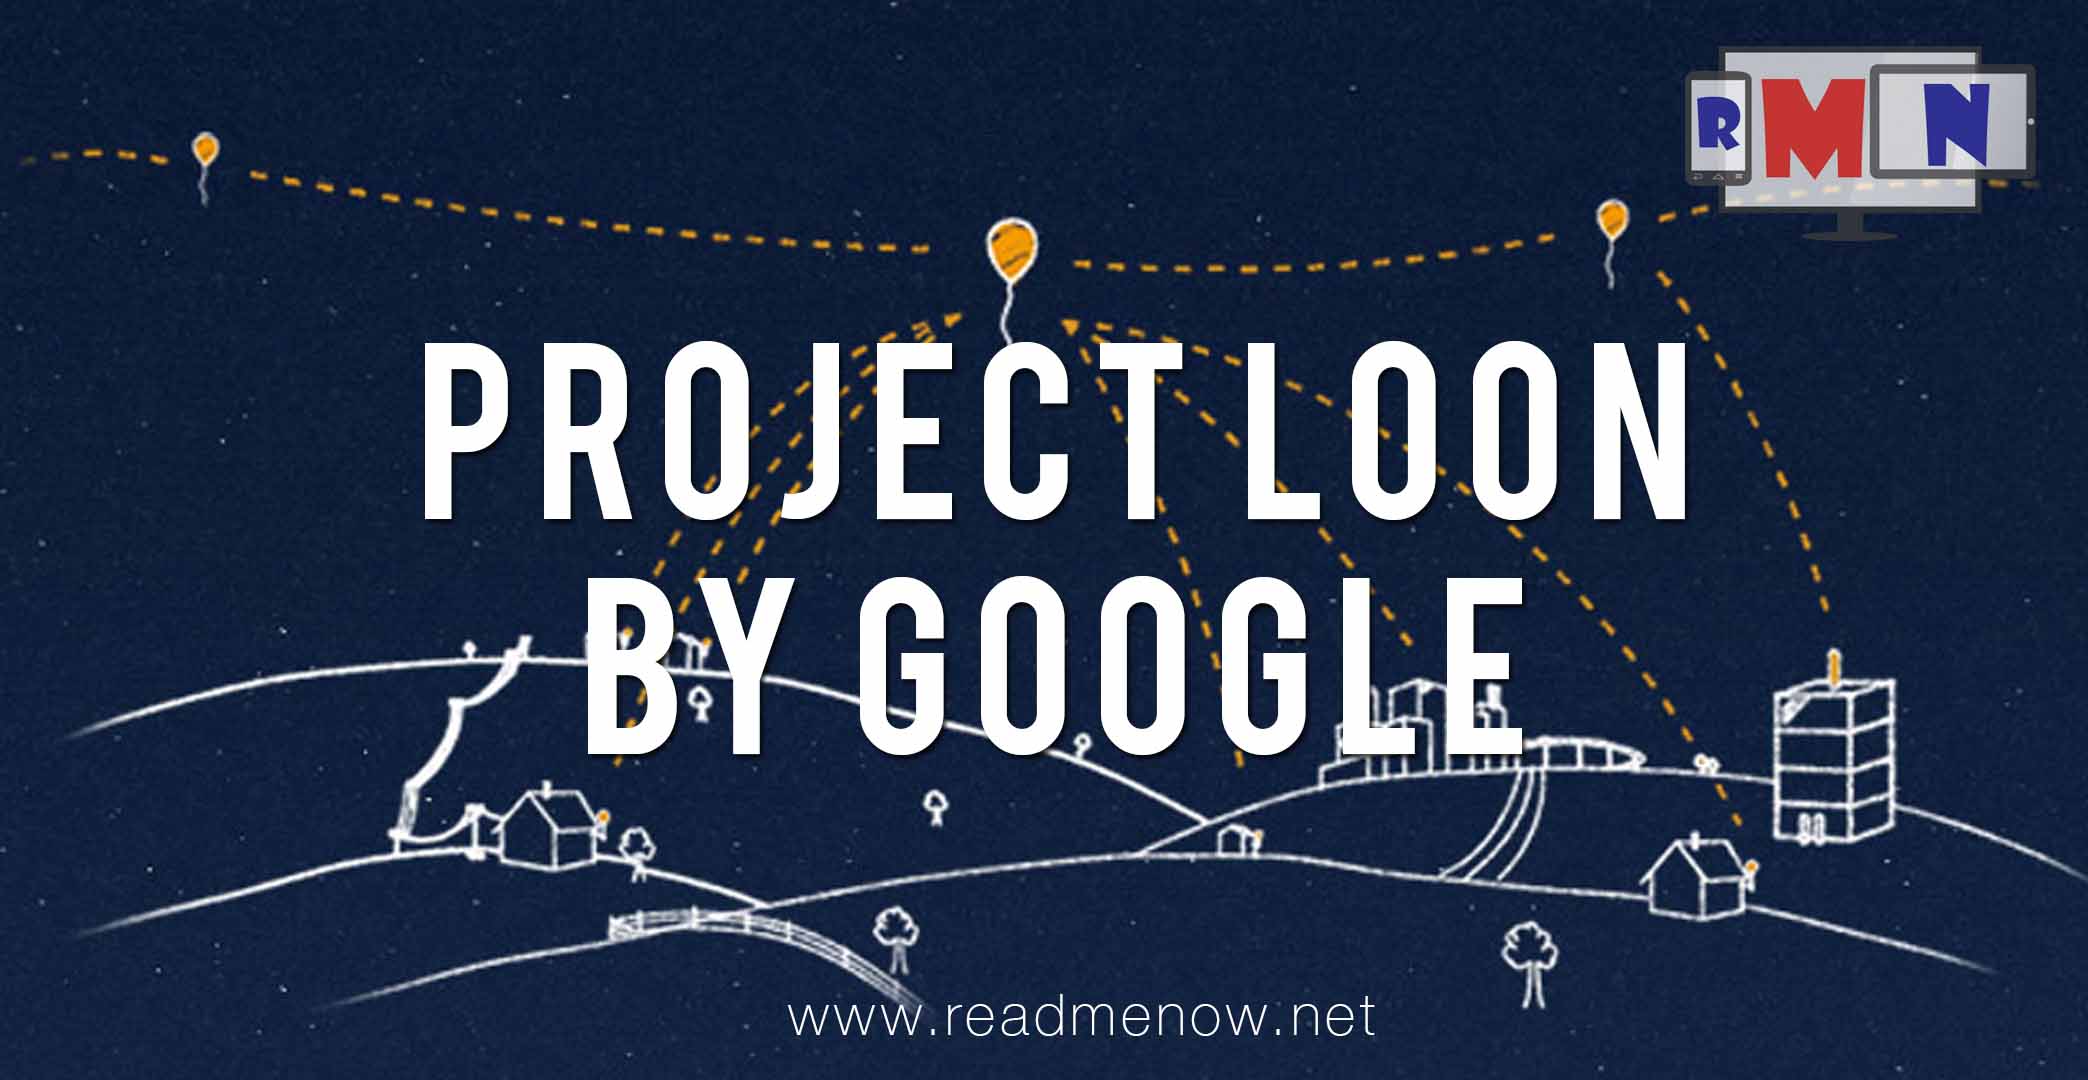 Google’s Project Loon: Balloon-powered Internet access